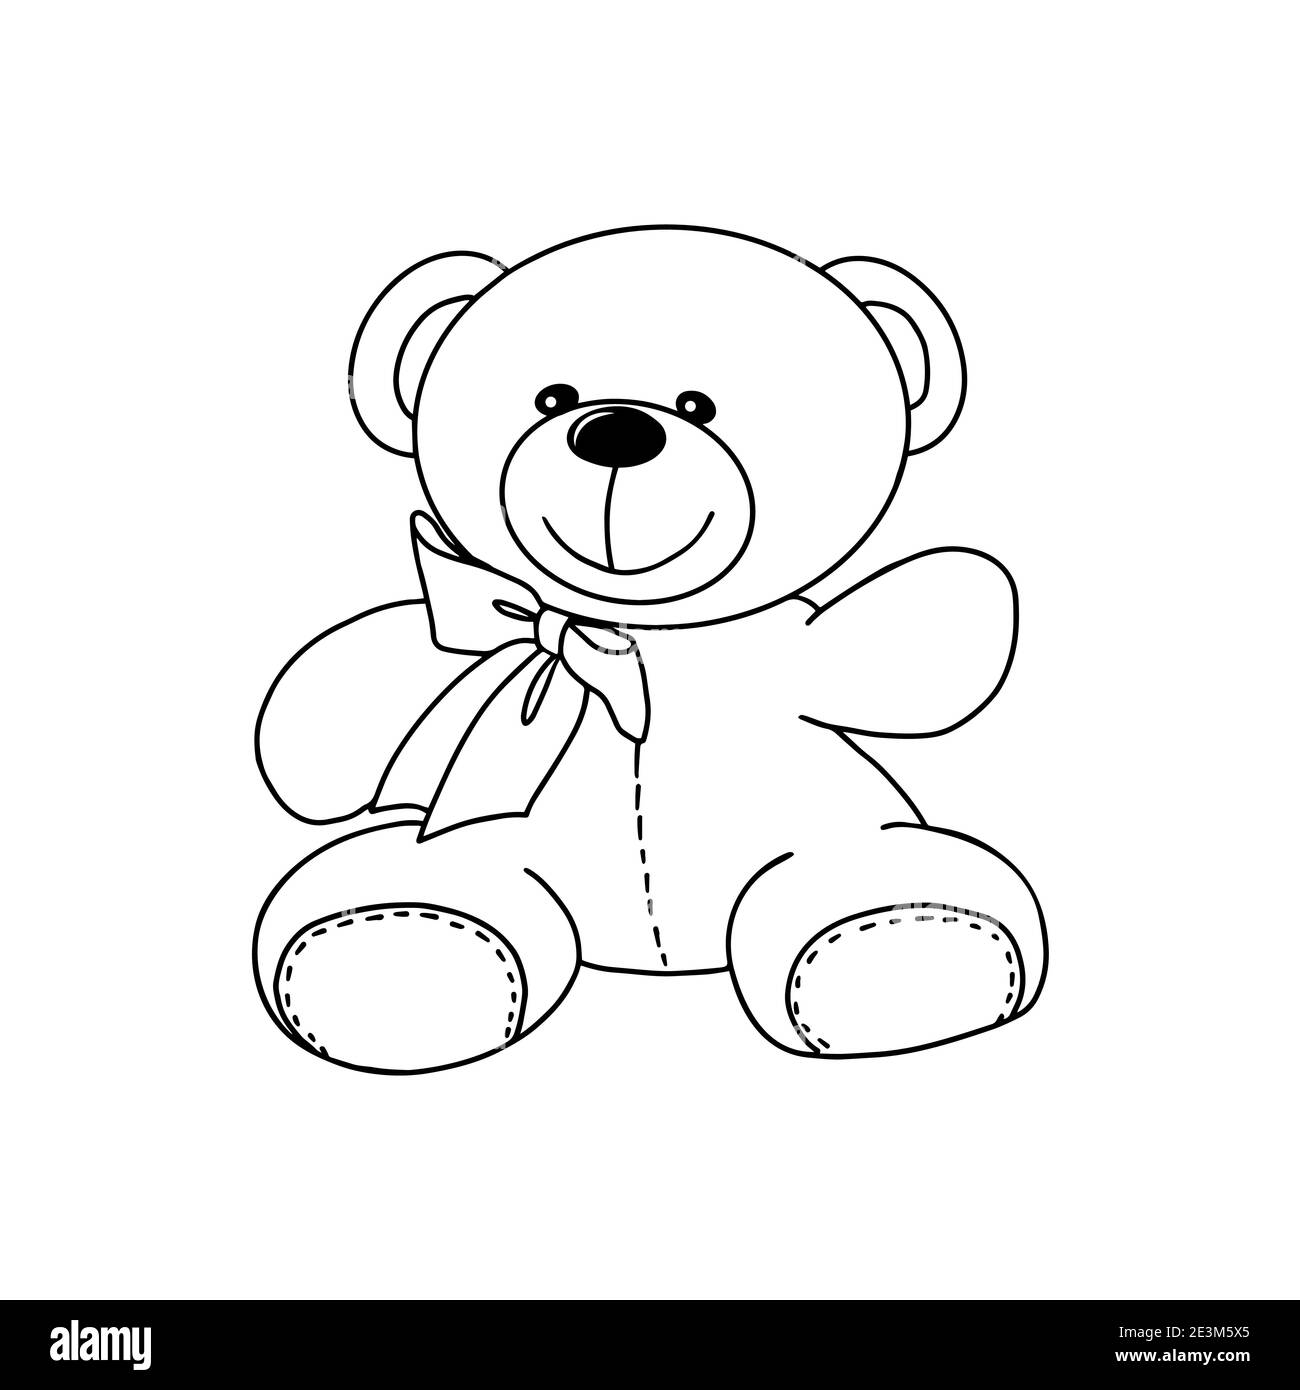 Vector hand-drawn illustration of a cute teddy bear. Gift toy for ...